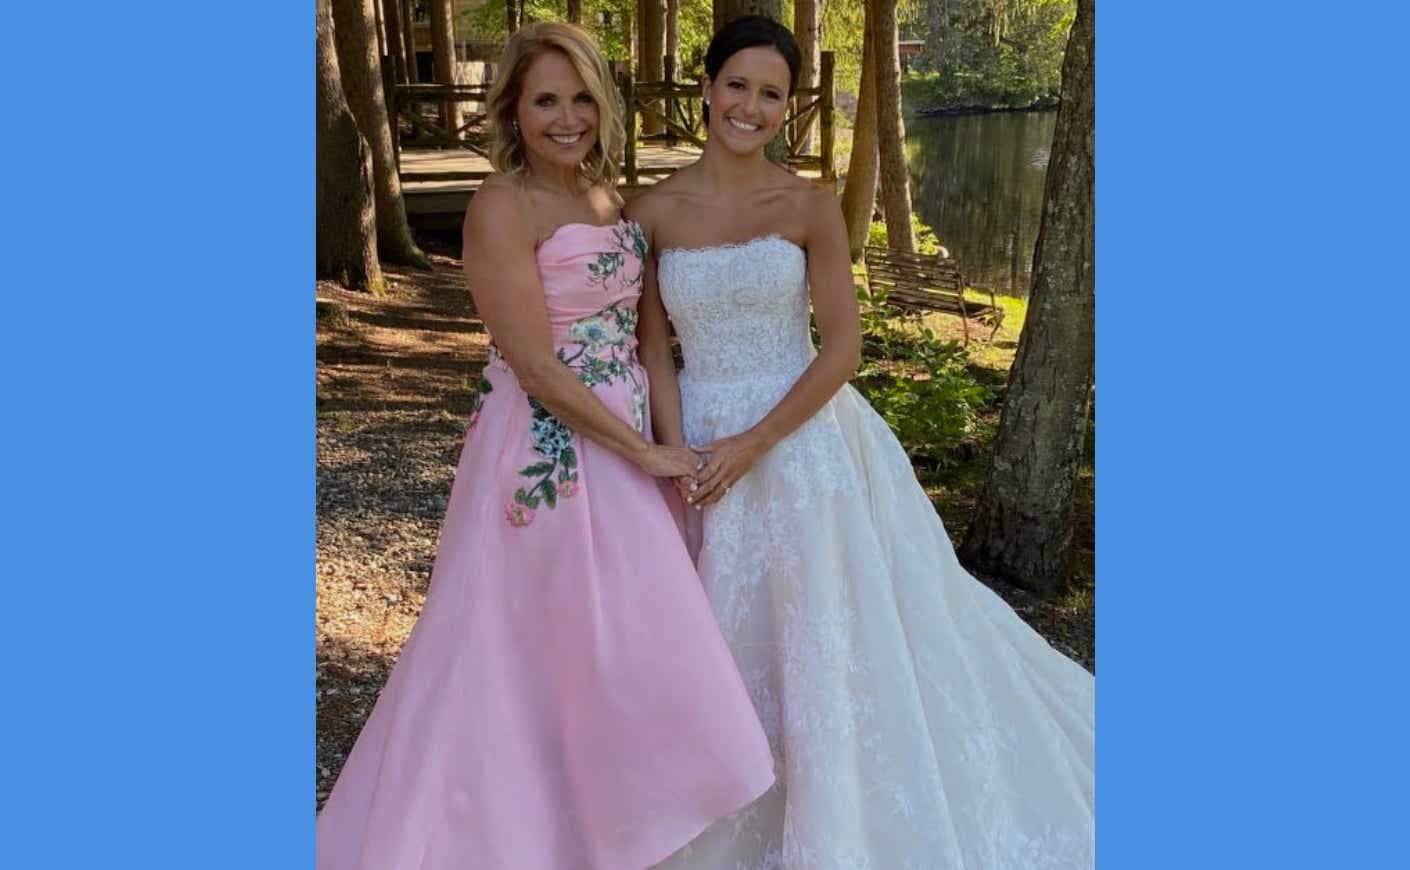 ellie and Katie Couric on her wedding day